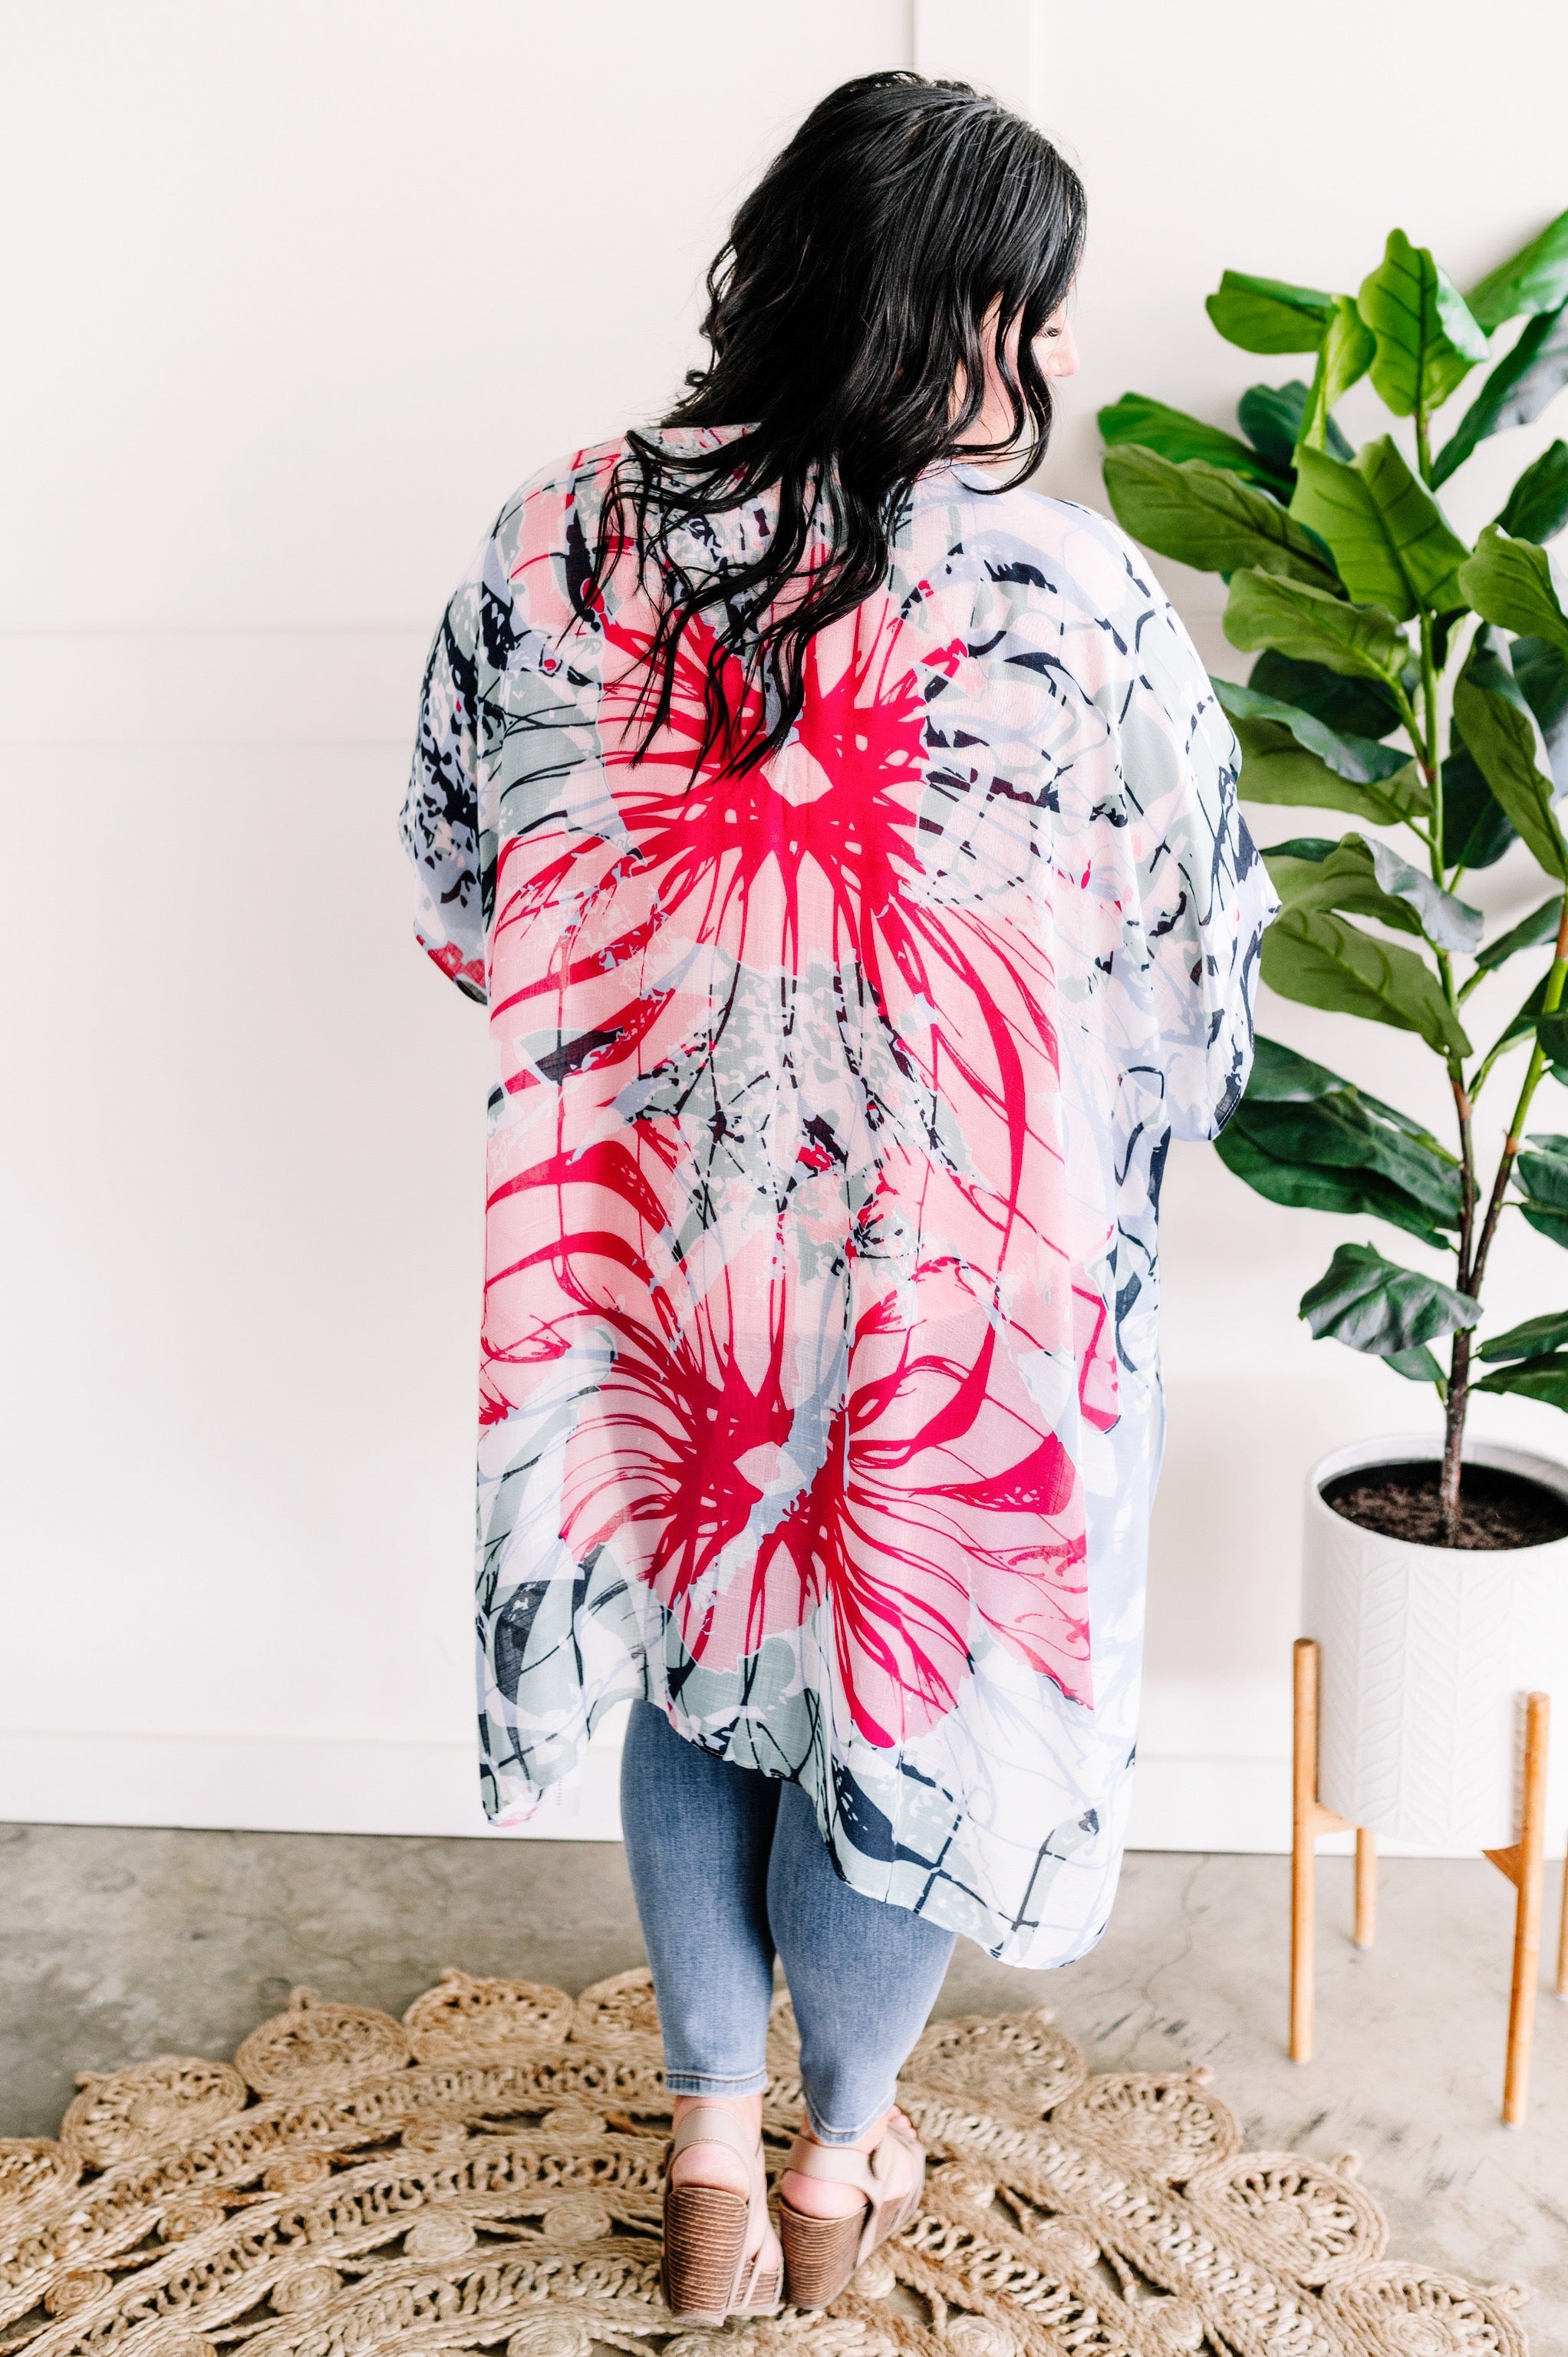 Soft Hibiscus Kimono In Blue, Pink, And Mint